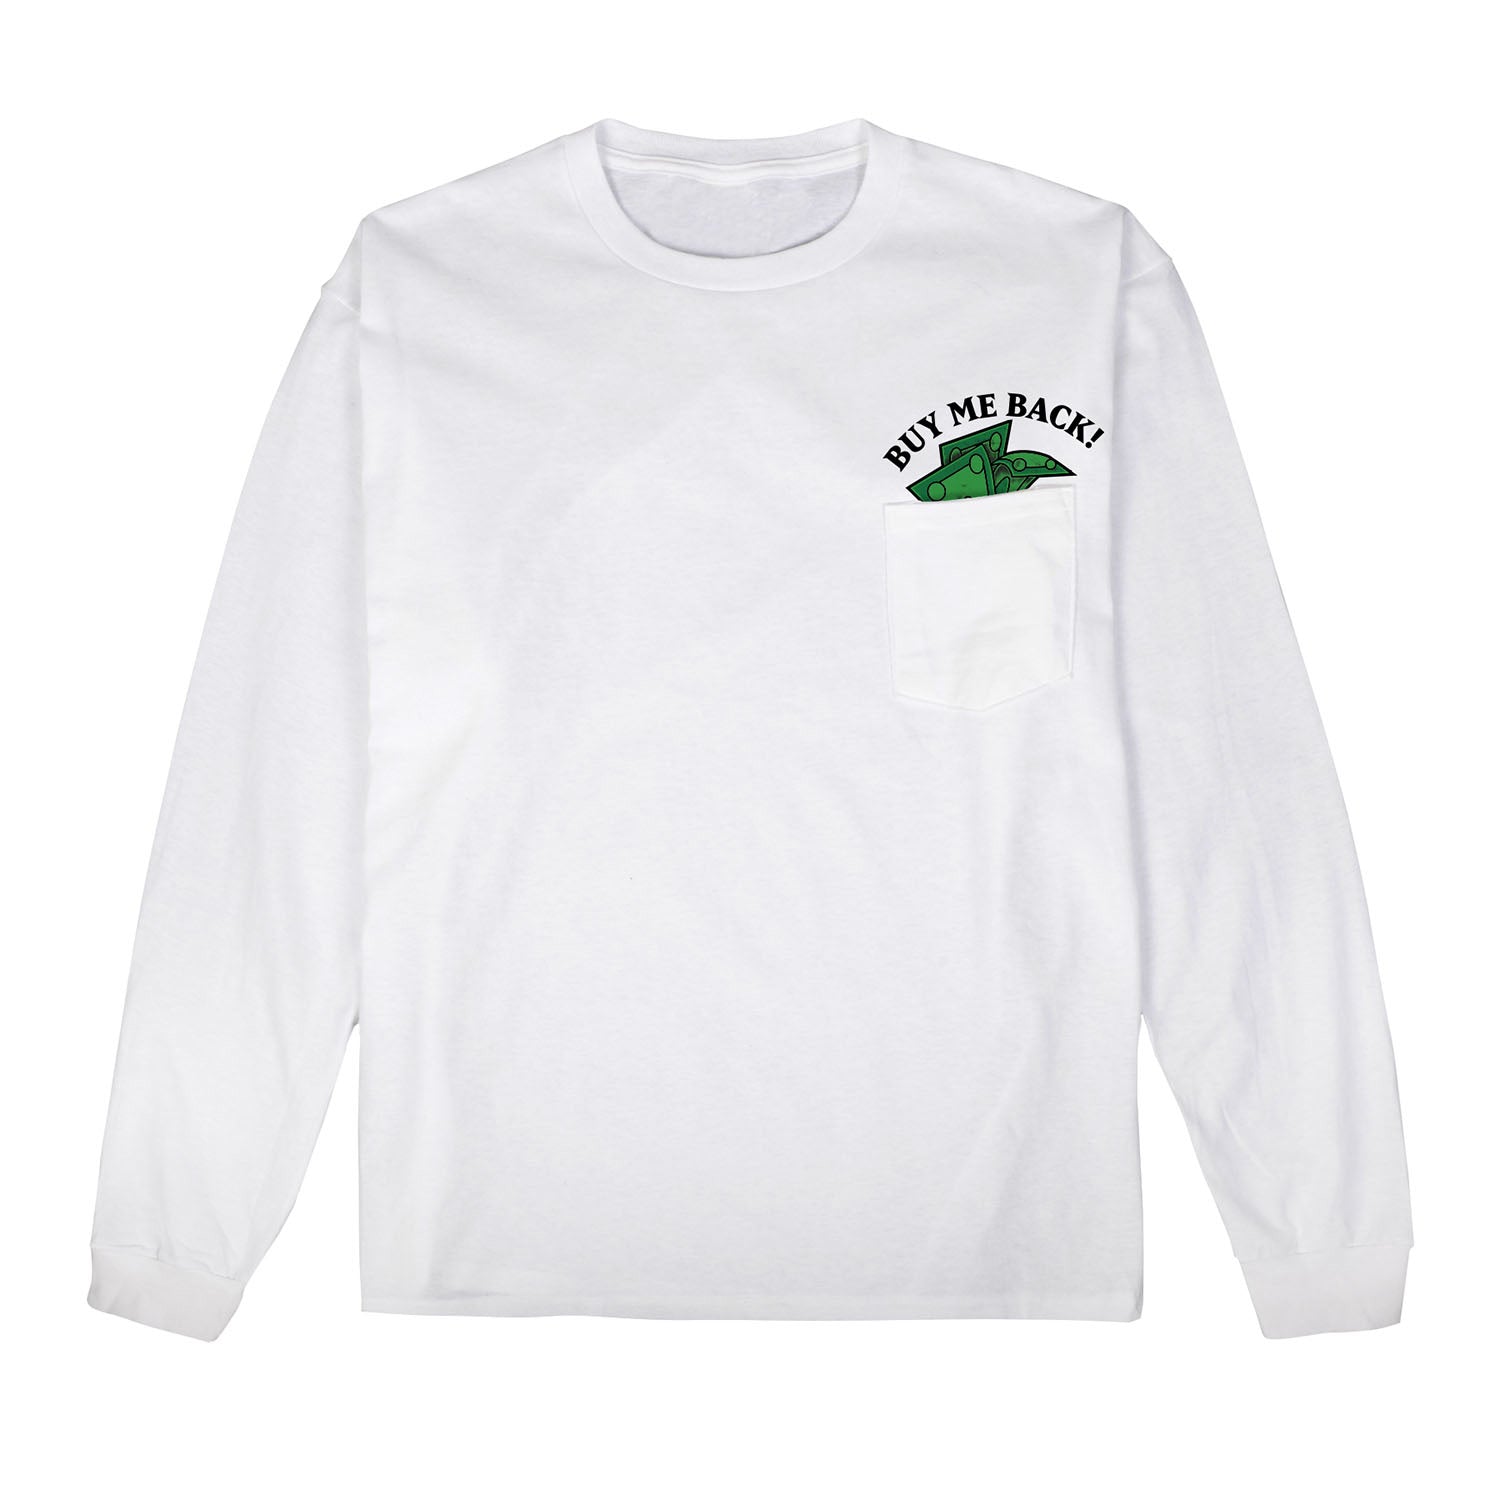 Call of Duty White Buy Me Back Long Sleeve Front Pocket T-Shirt - Front View